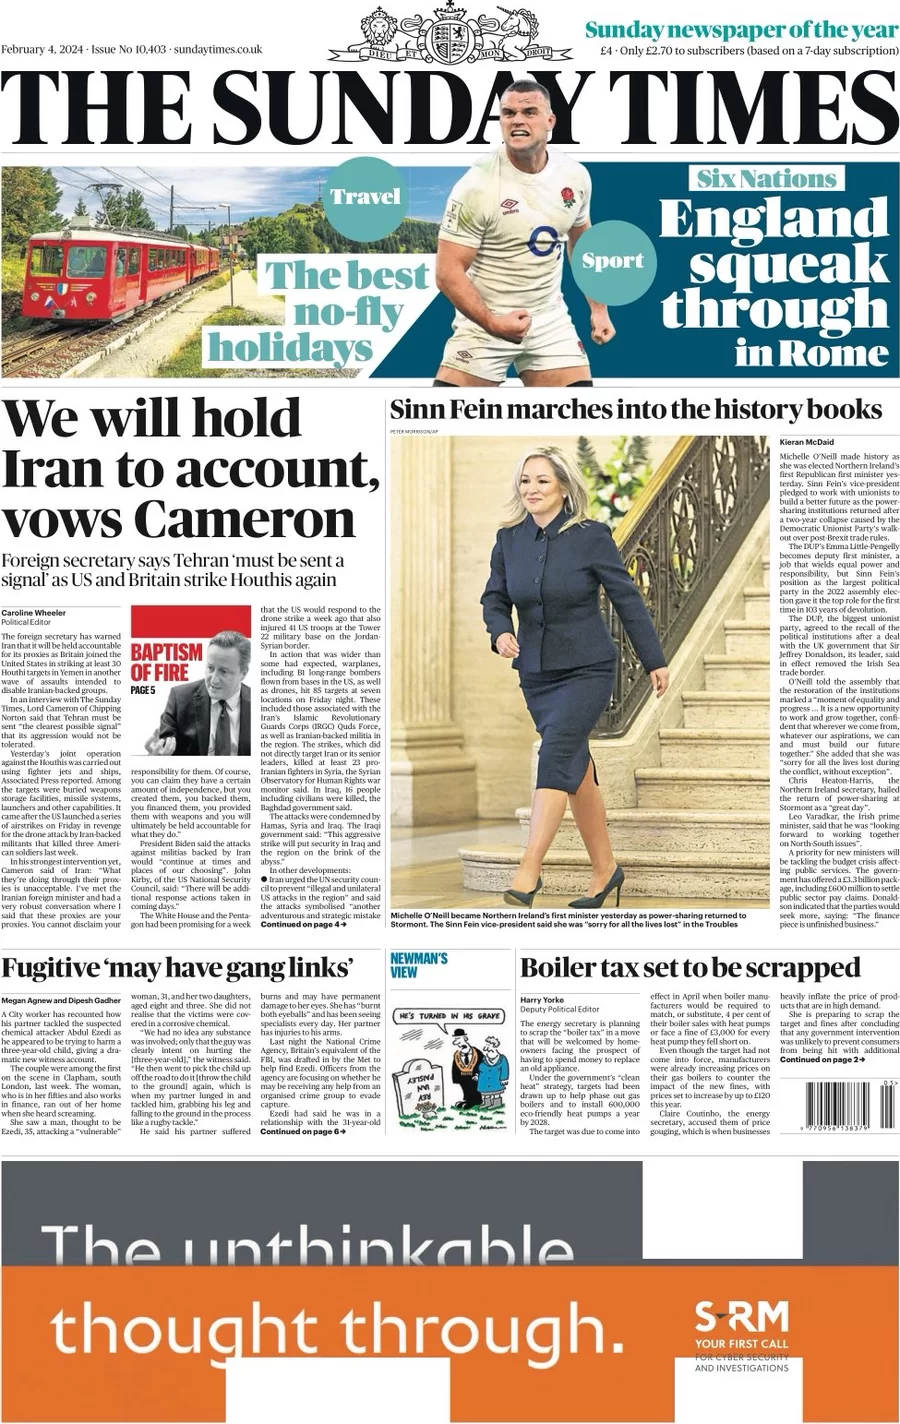 The Sunday Times – We will hold Iran to account, vows Cameron